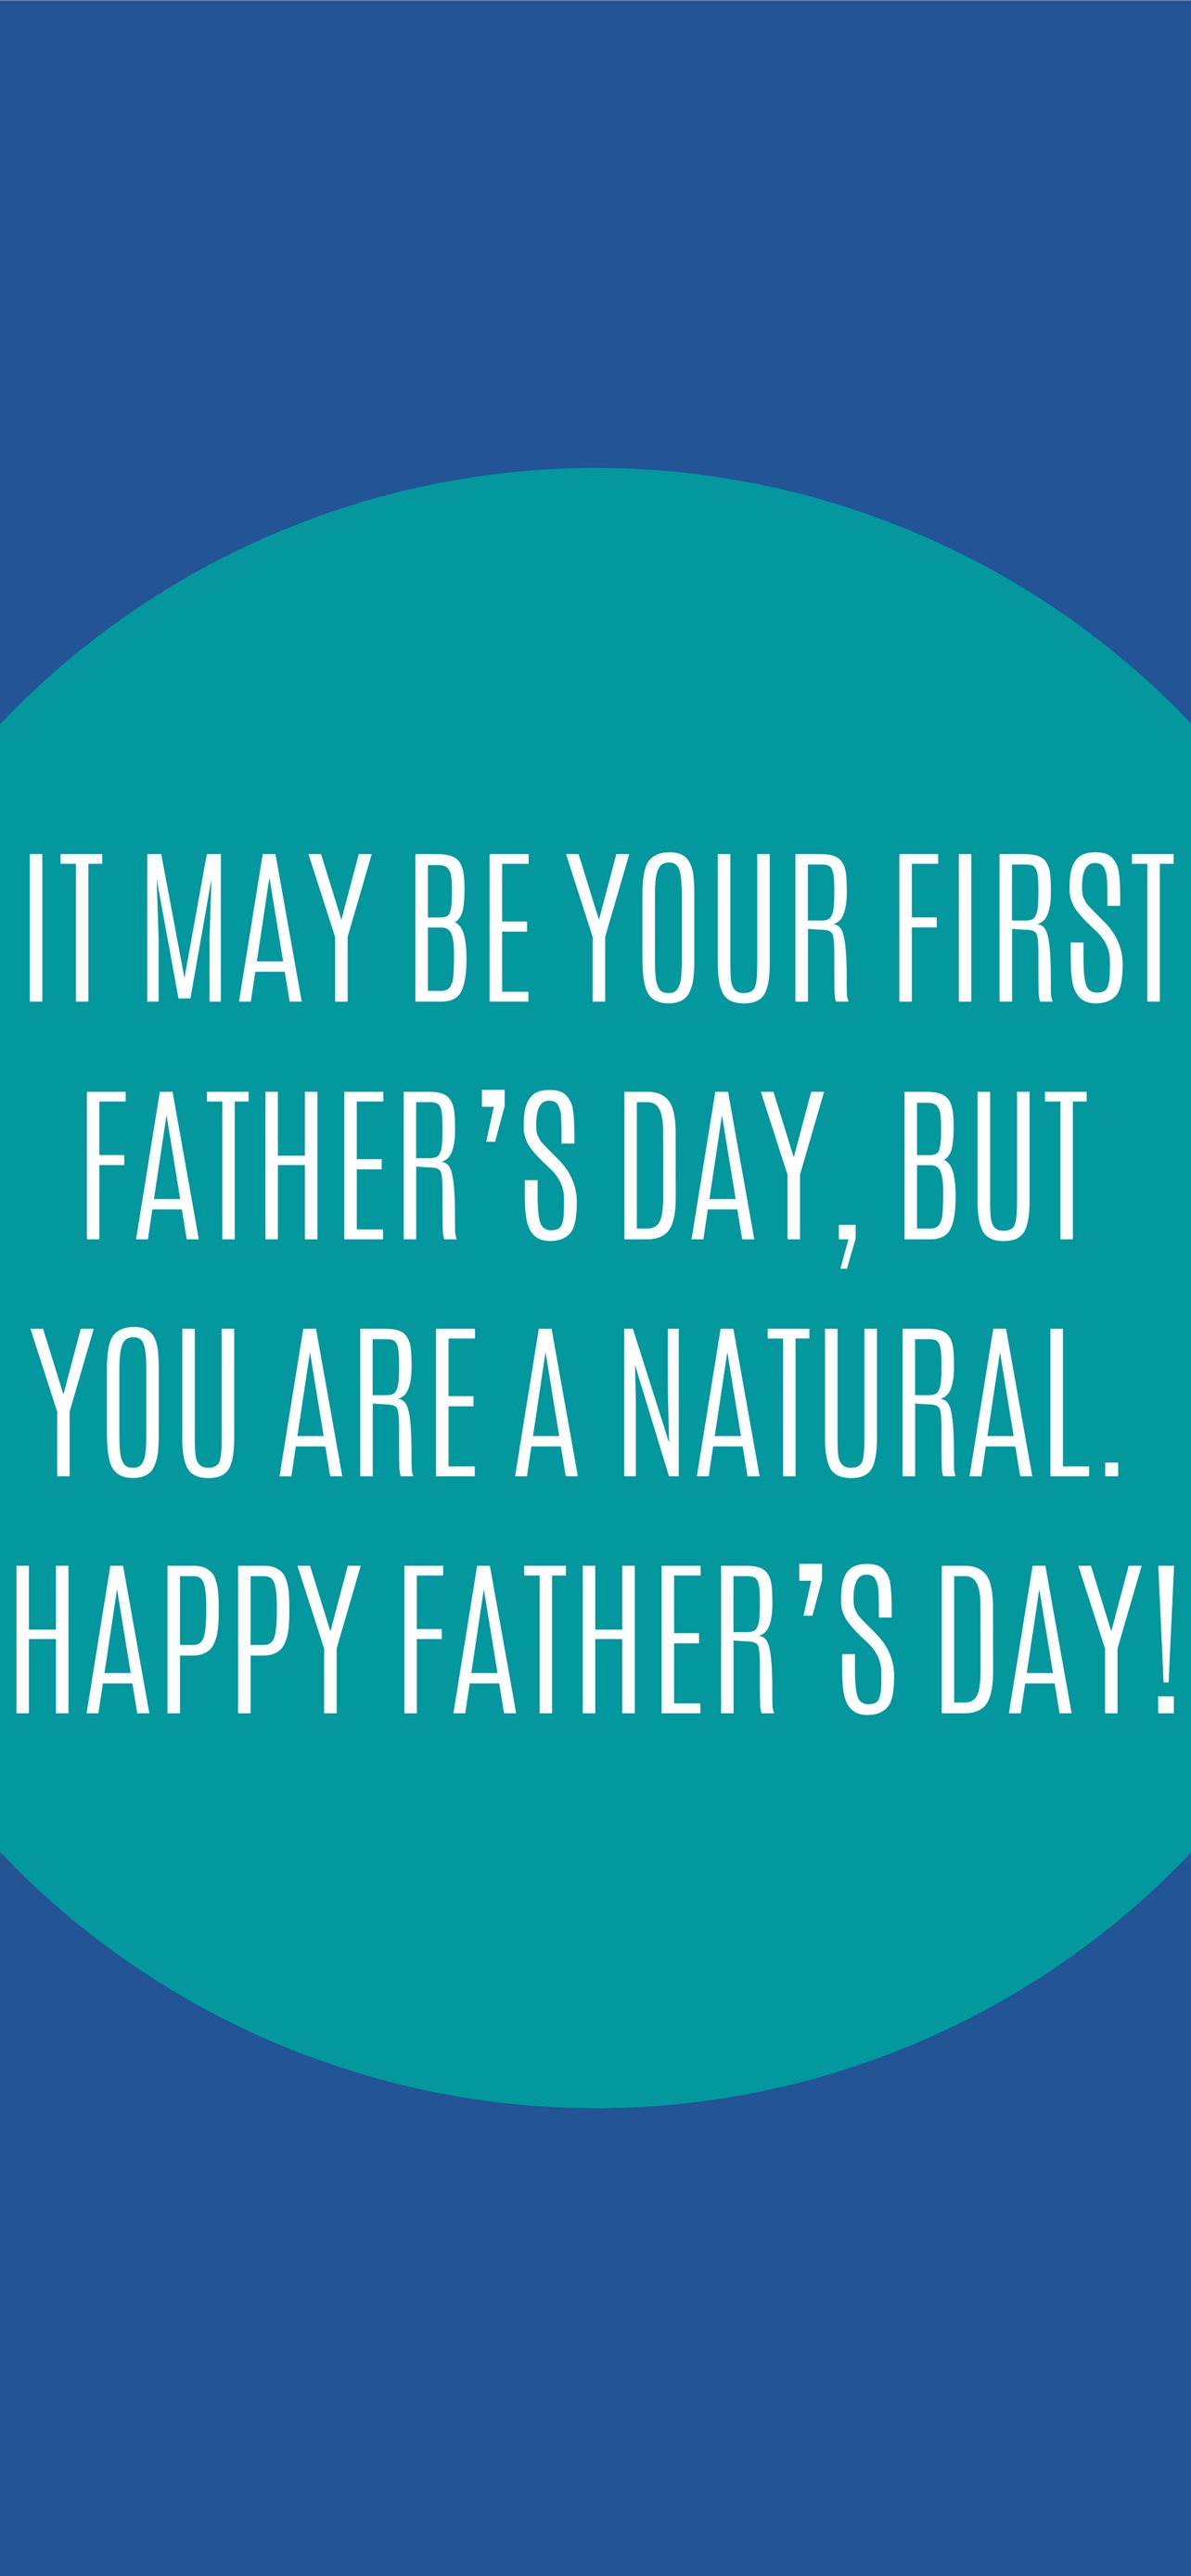 Free Fathers Day Background Images  Wallpapers